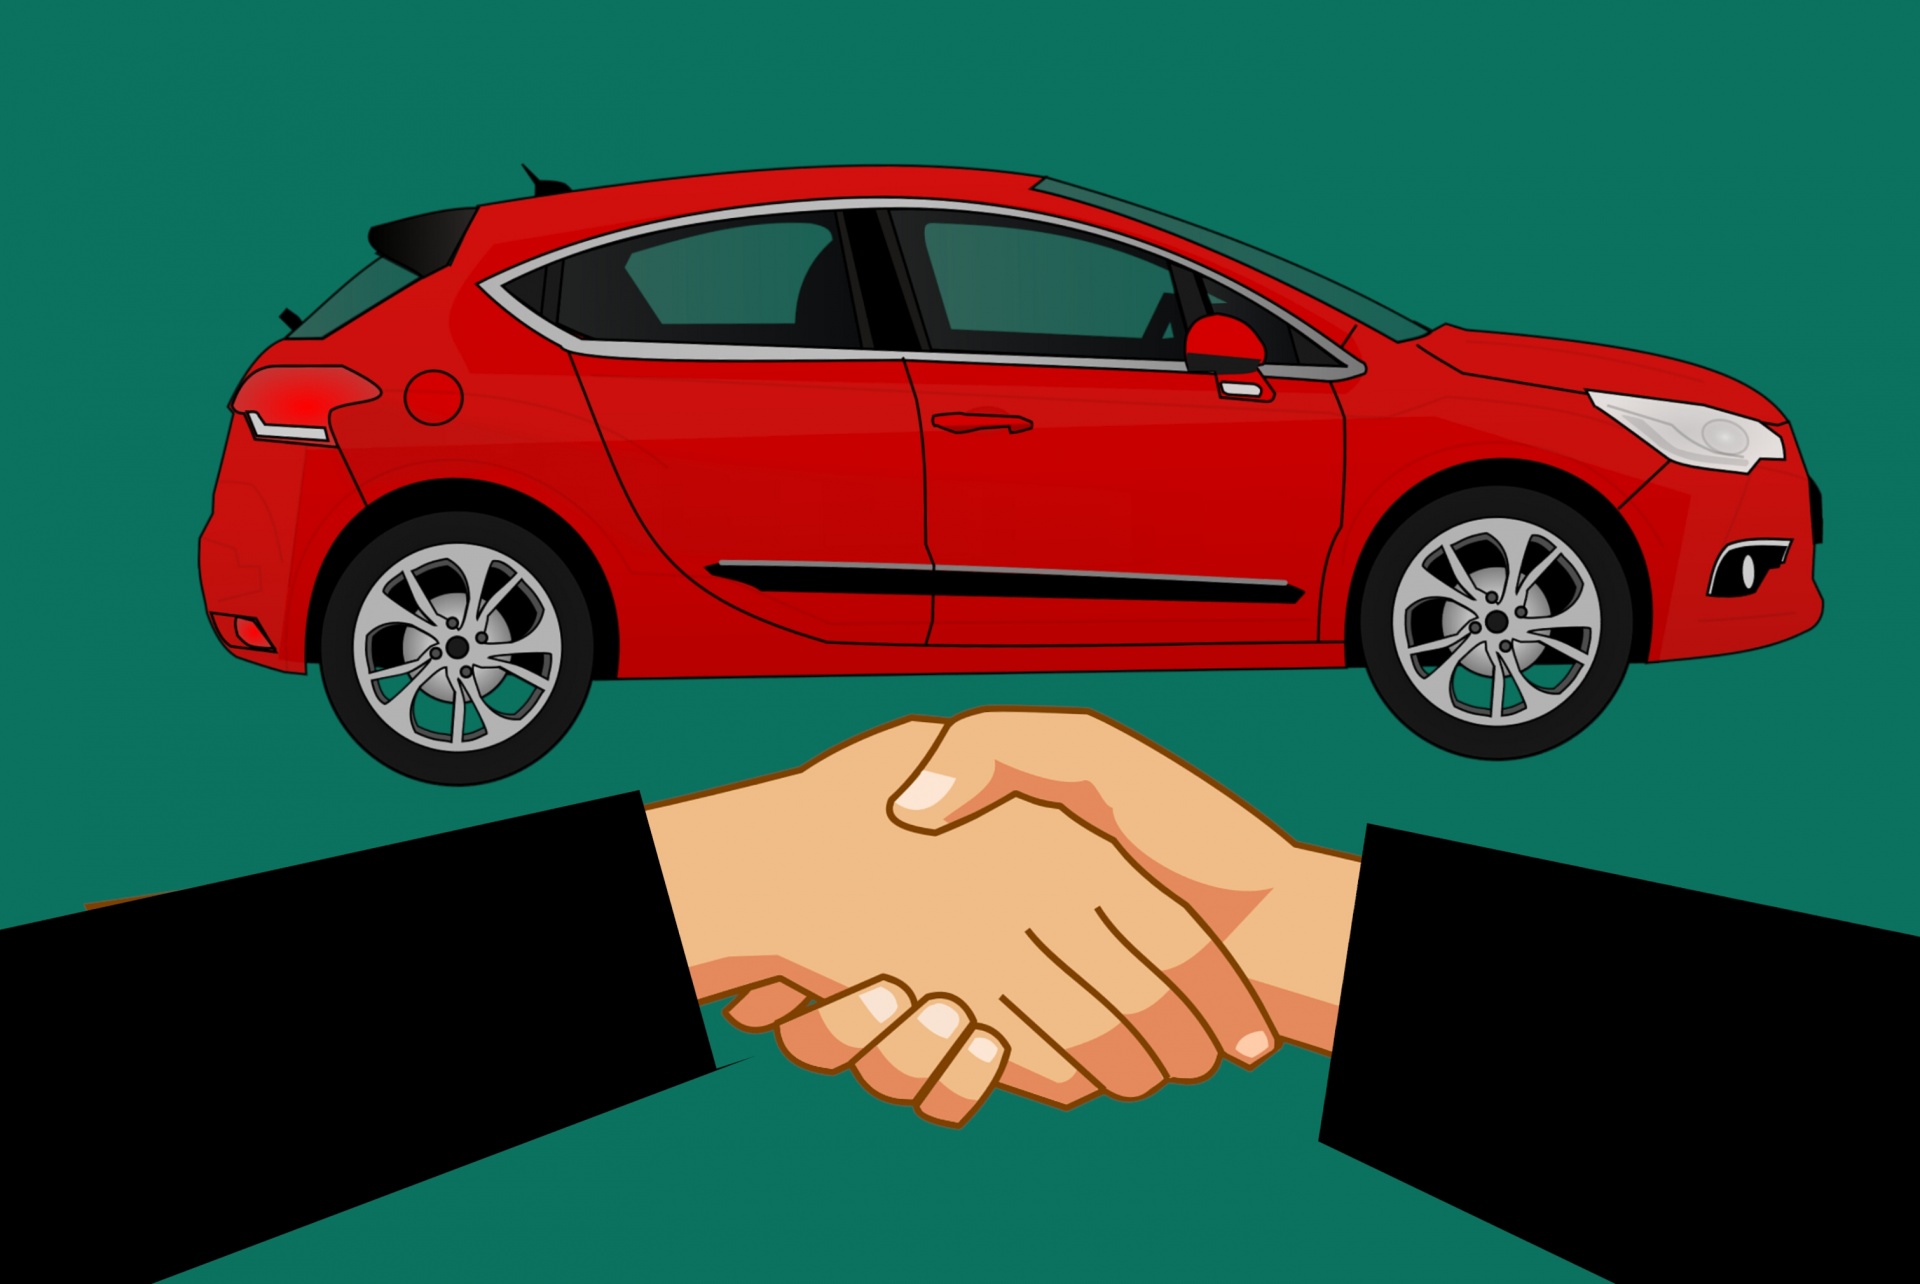 new vs used car, is it worth buying a new car, should i buy a new car, new vs used cars, buying new vs used car, buy new or used car, should i buy a new or used car, new or used car, when to buy a new car, new car vs used car, is it better to buy a new or used car, why buy new autos, is it wise to buy a new car, is it worthy it to buy a new car, old car vs new car, worth buying a new car, when is it worth it to buy a new car,